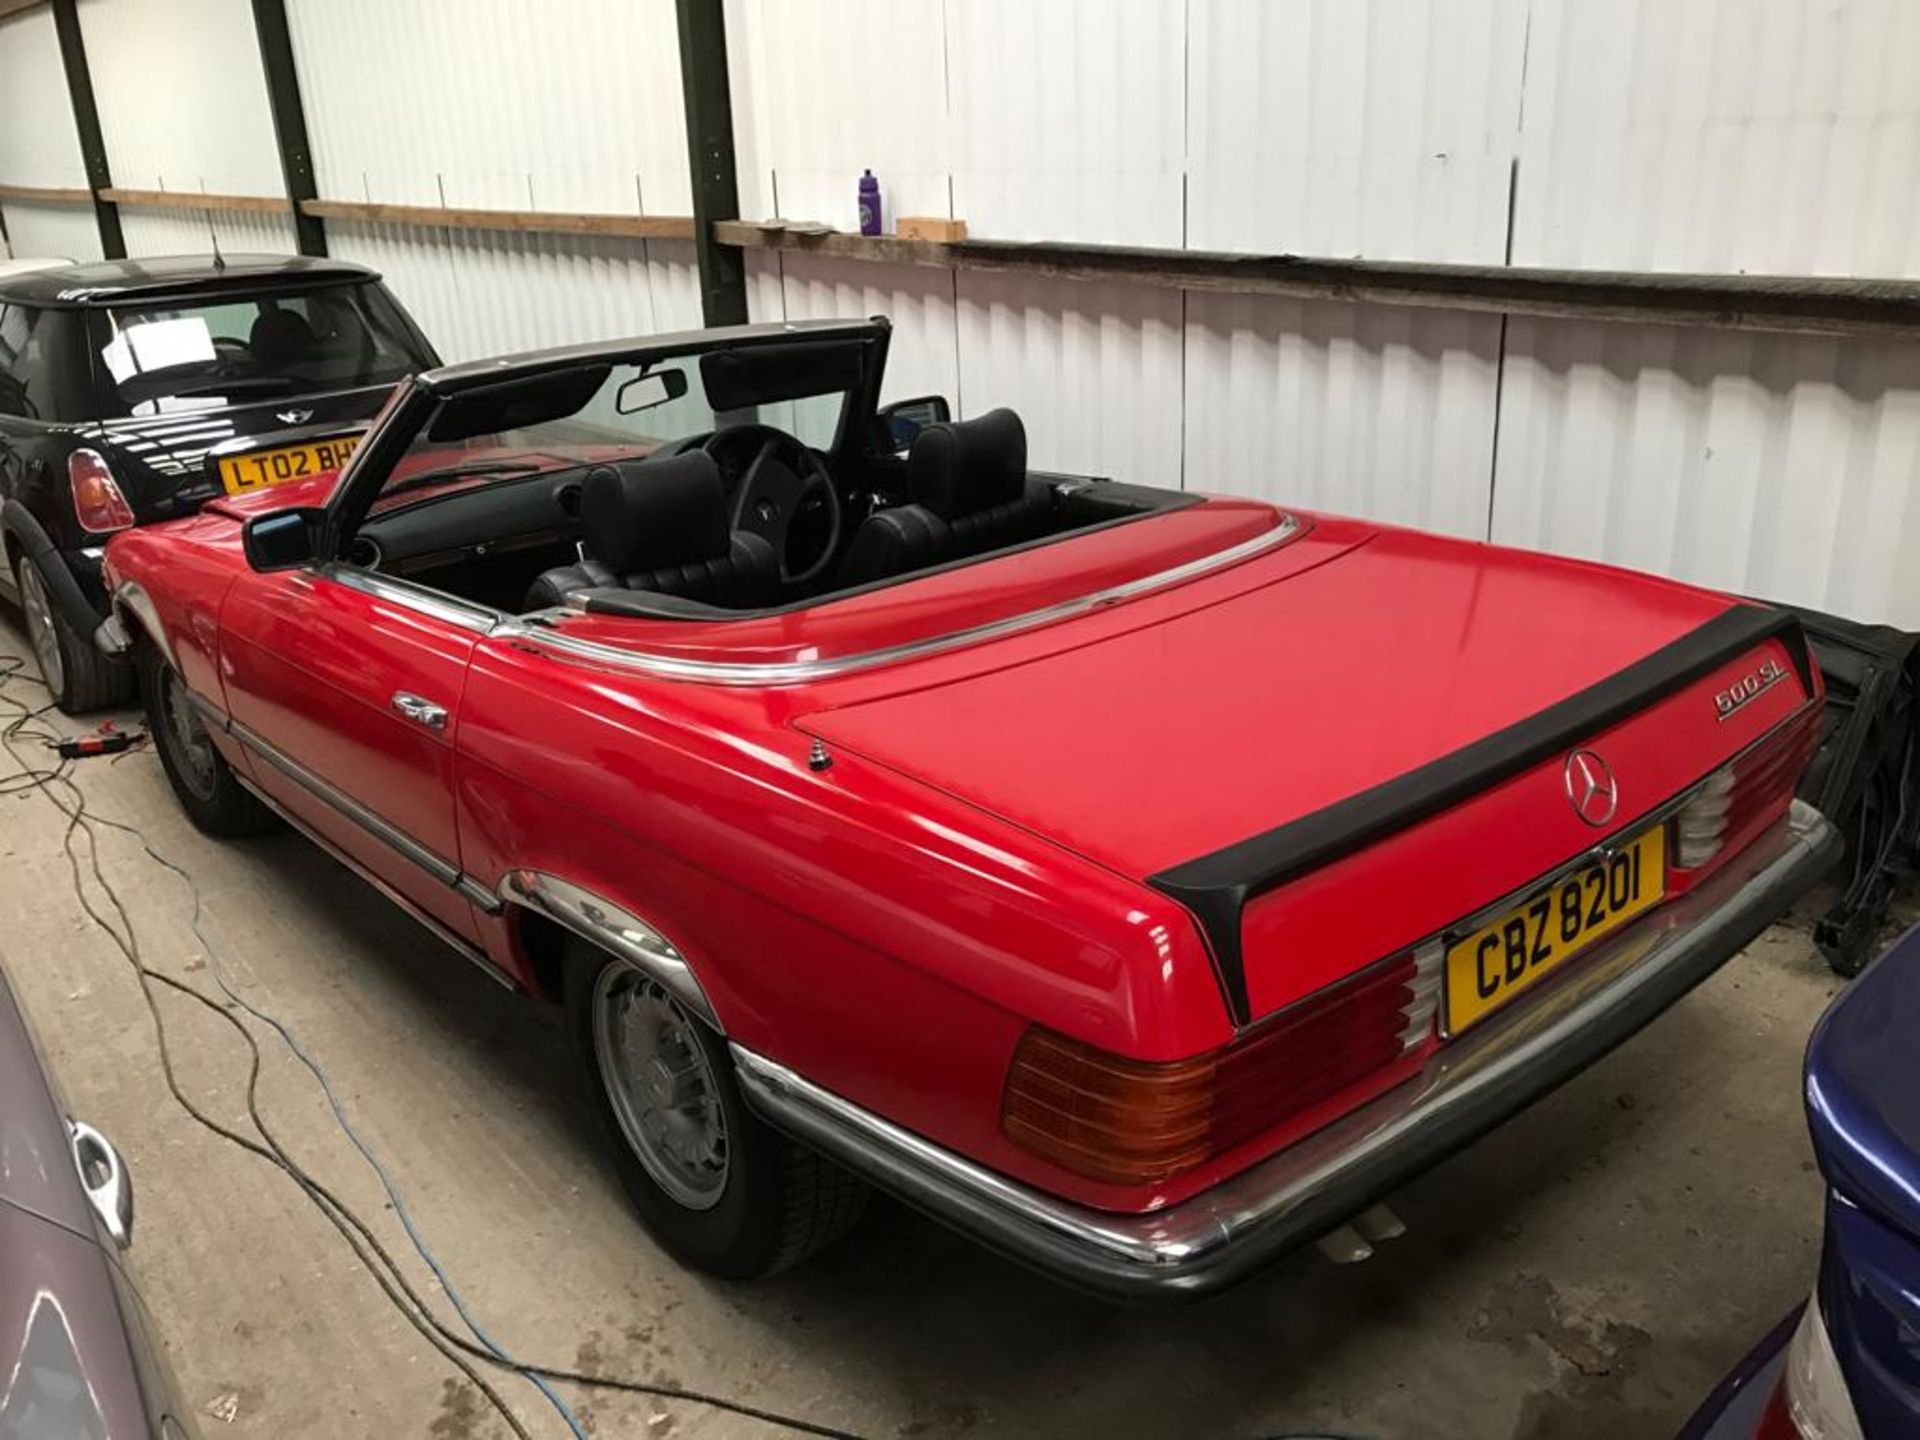 Mercedes 500SL R107 - 69,938 Miles - CL331 - Location: Manchester - No VAT on the hammer! This 500SL - Image 9 of 11